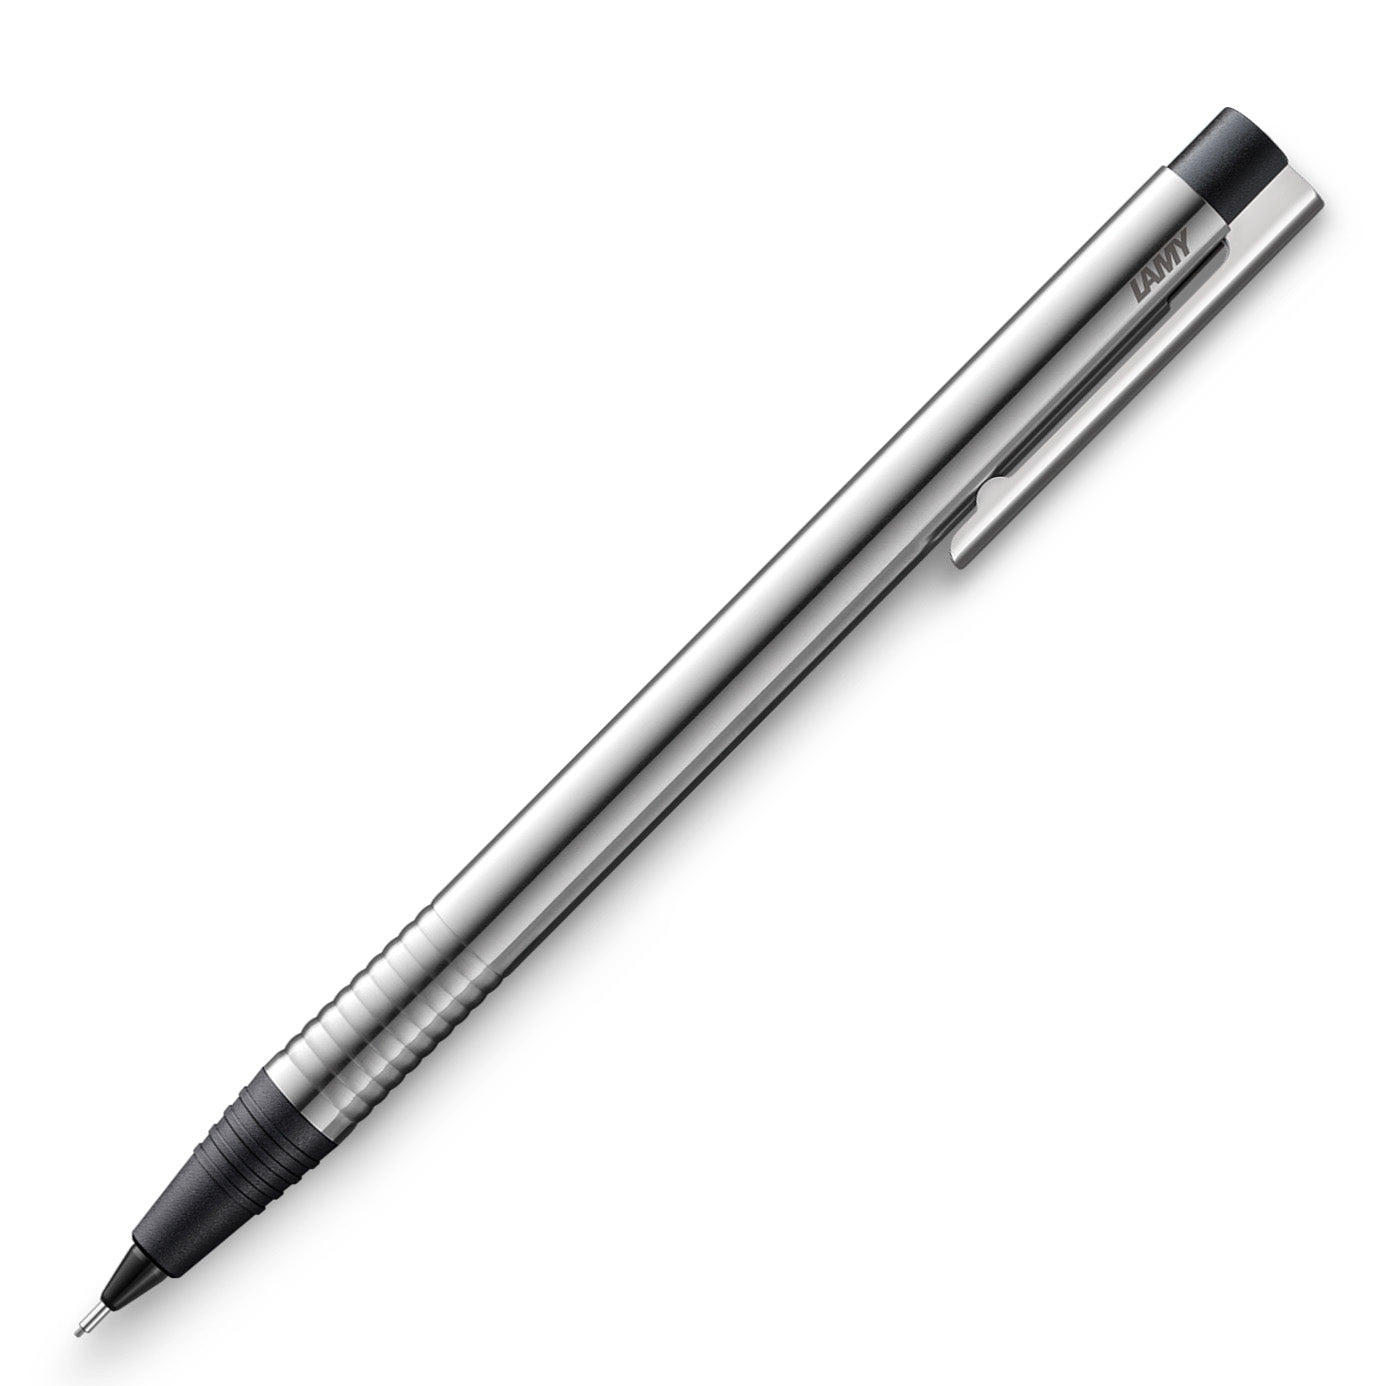 Lamy Logo Pencil in Black with Matte stainless steel finish, Lamy logo mechanical pencil, mechanical pencil made in Germany